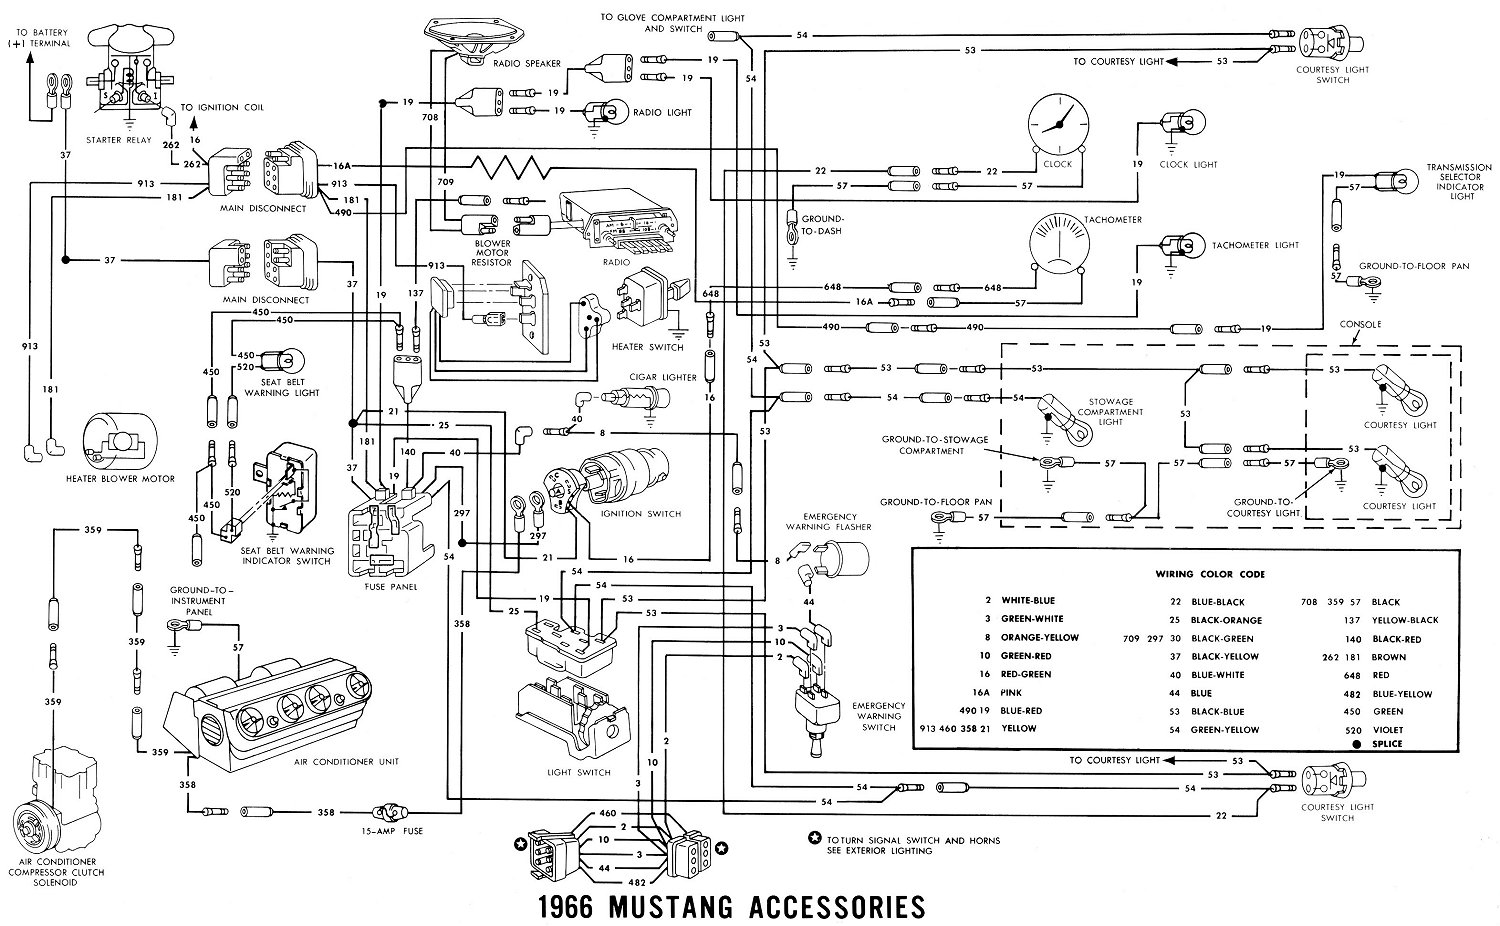 1969 Mustang Wiring Diagram from jacobsonrs.tripod.com